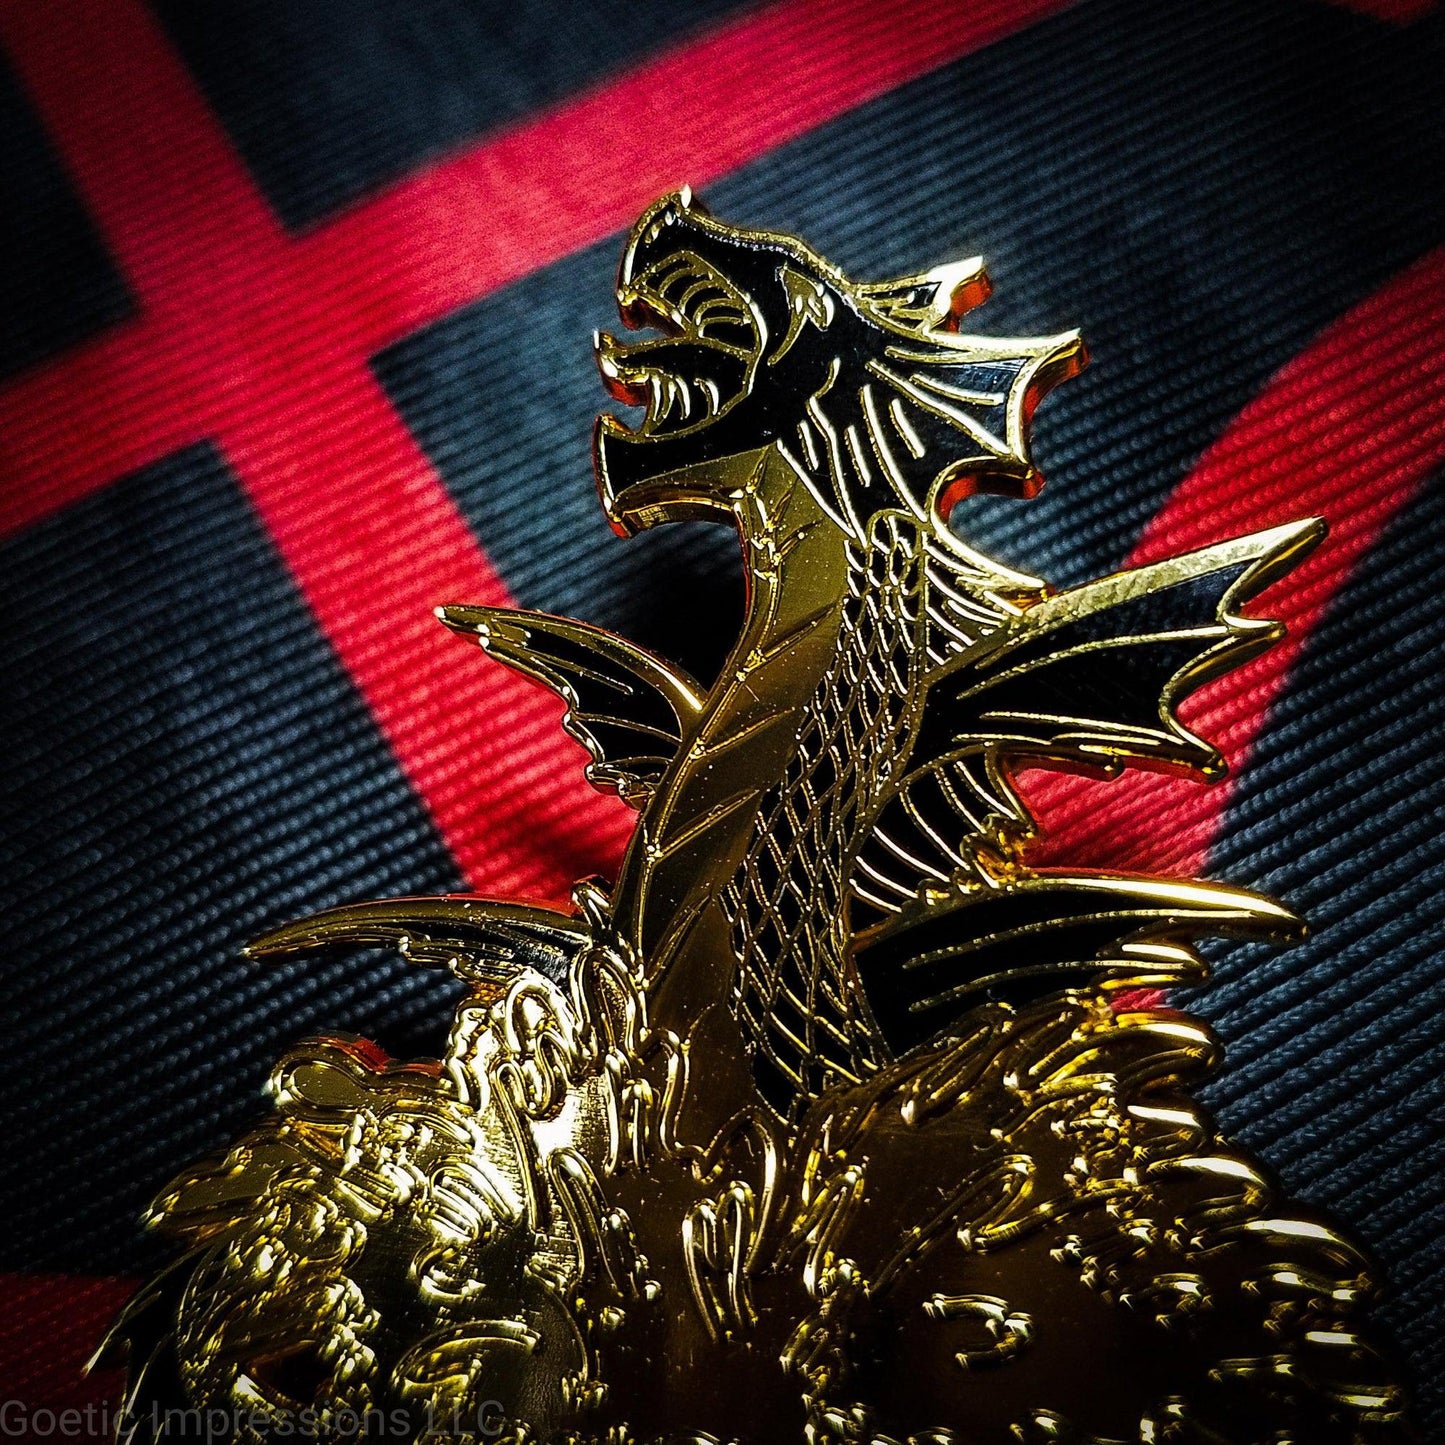 A black and gold hard enamel pin of the sea serpent Leviathan. Leviathan is shown bursting from waters and jaws wide open. The pin is on an altar black and red altar cloth with Levithan's sigil on it.